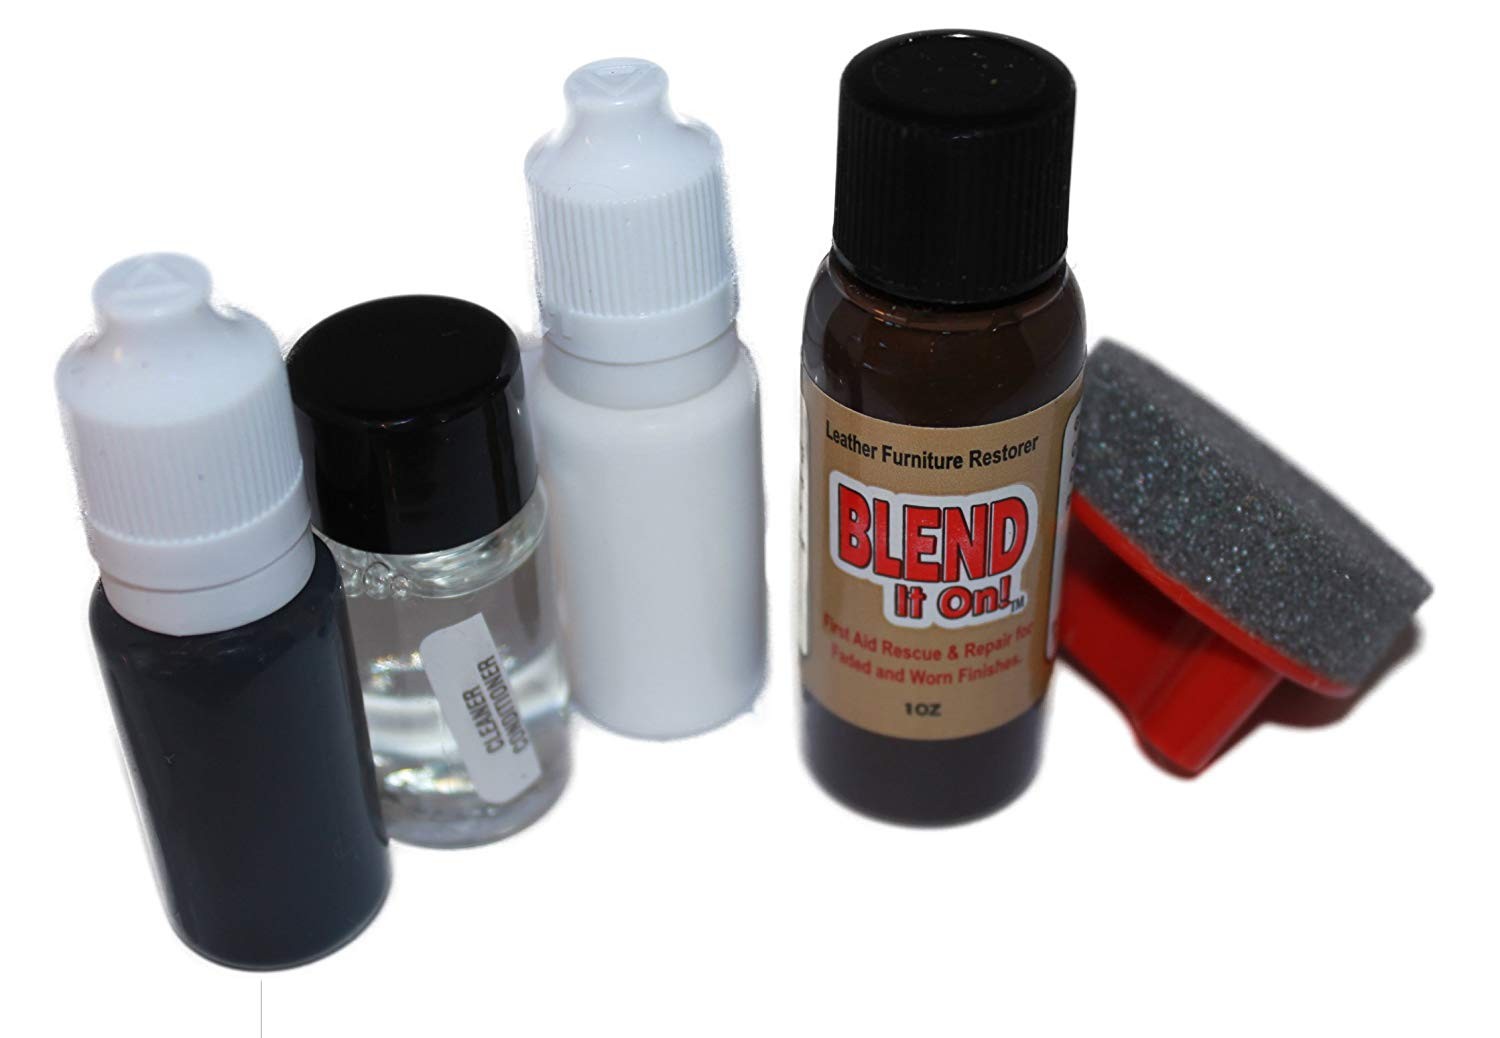 Top 10 Best Leather Repair Kits [2022 Reviews] - Leather Toolkits